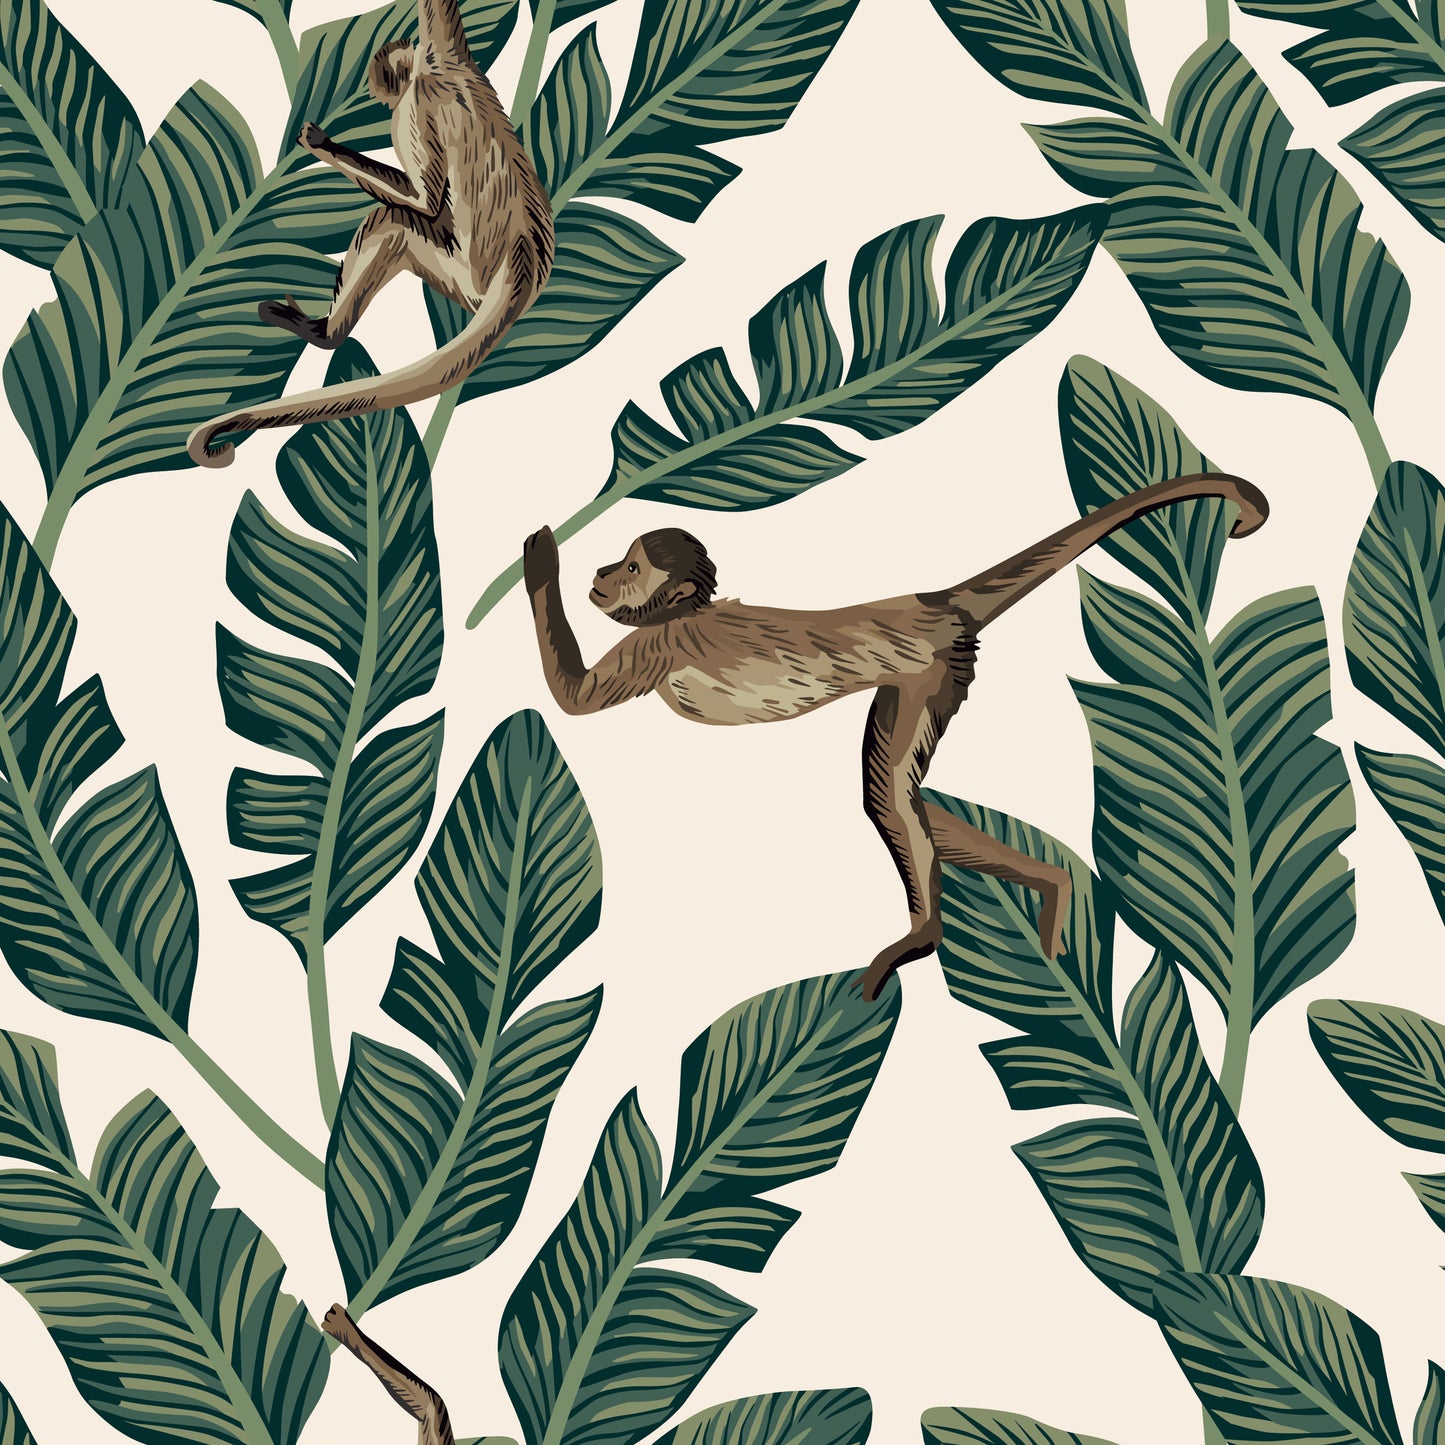 Monkey Business Removable Peel And Stick Wallpaper